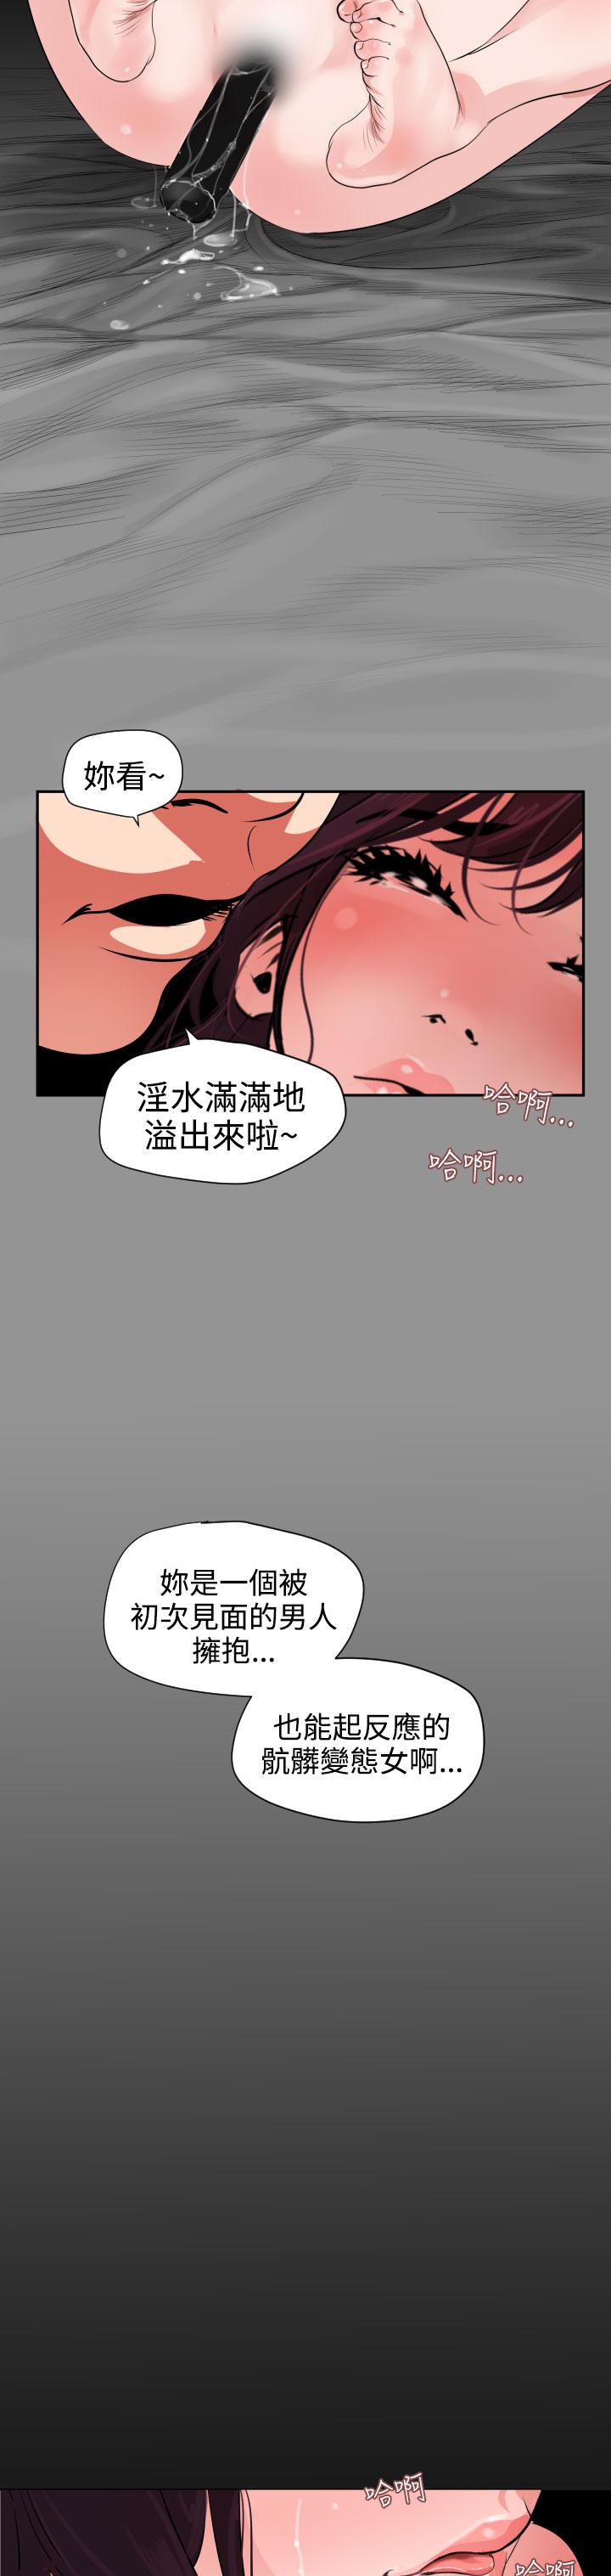 Desire King (慾求王) Ch.1-16 (chinese) 315